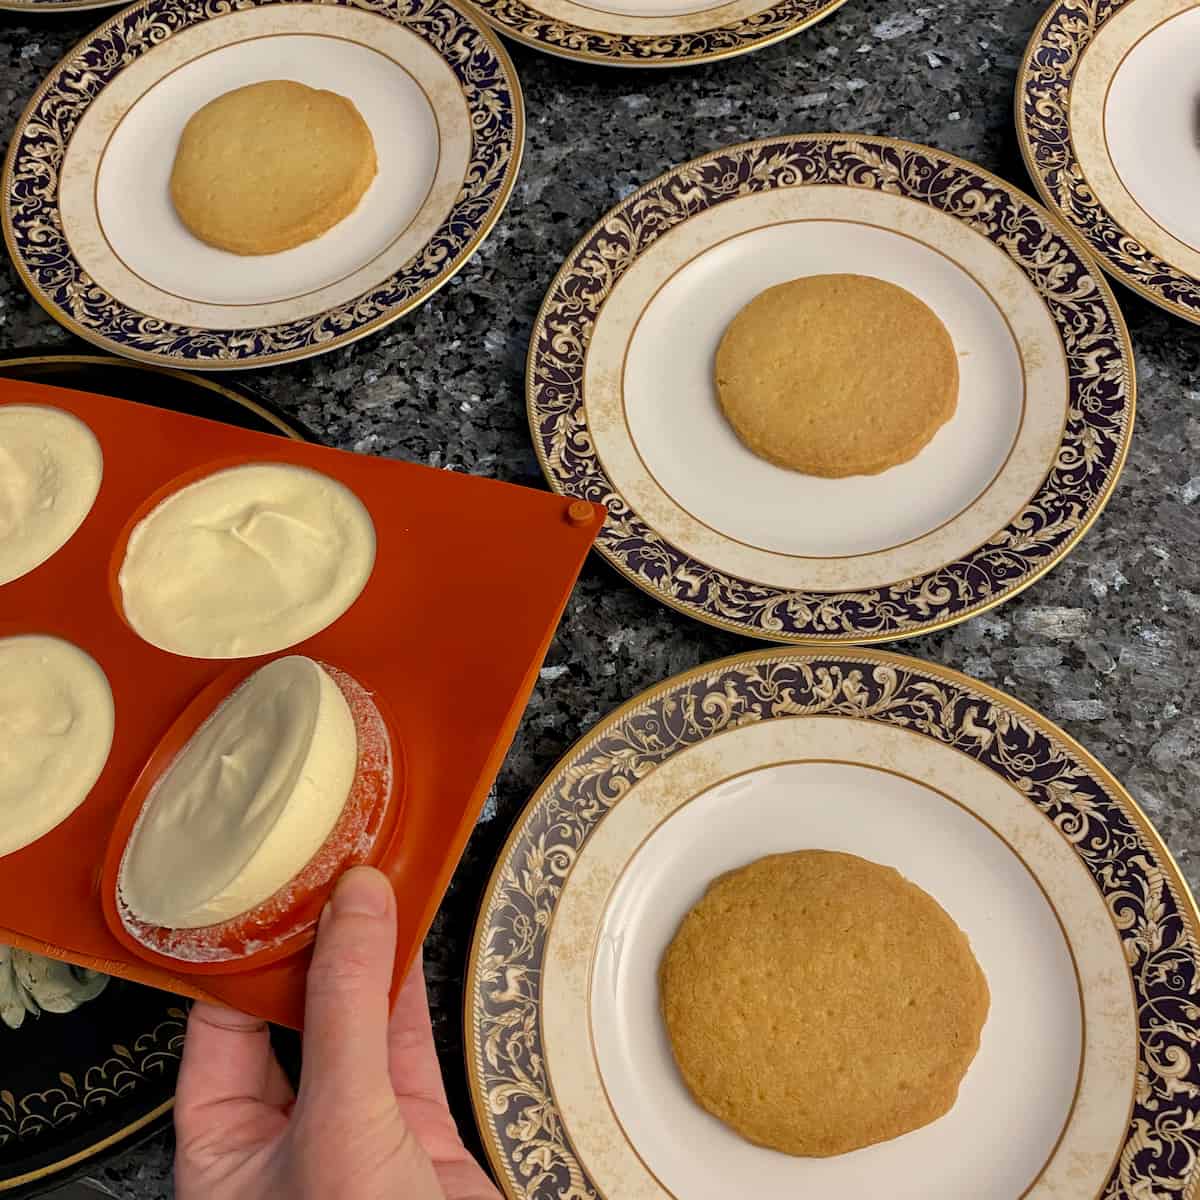 turning out parfaits from a silicone mould next to plates with thin shortbread rounds